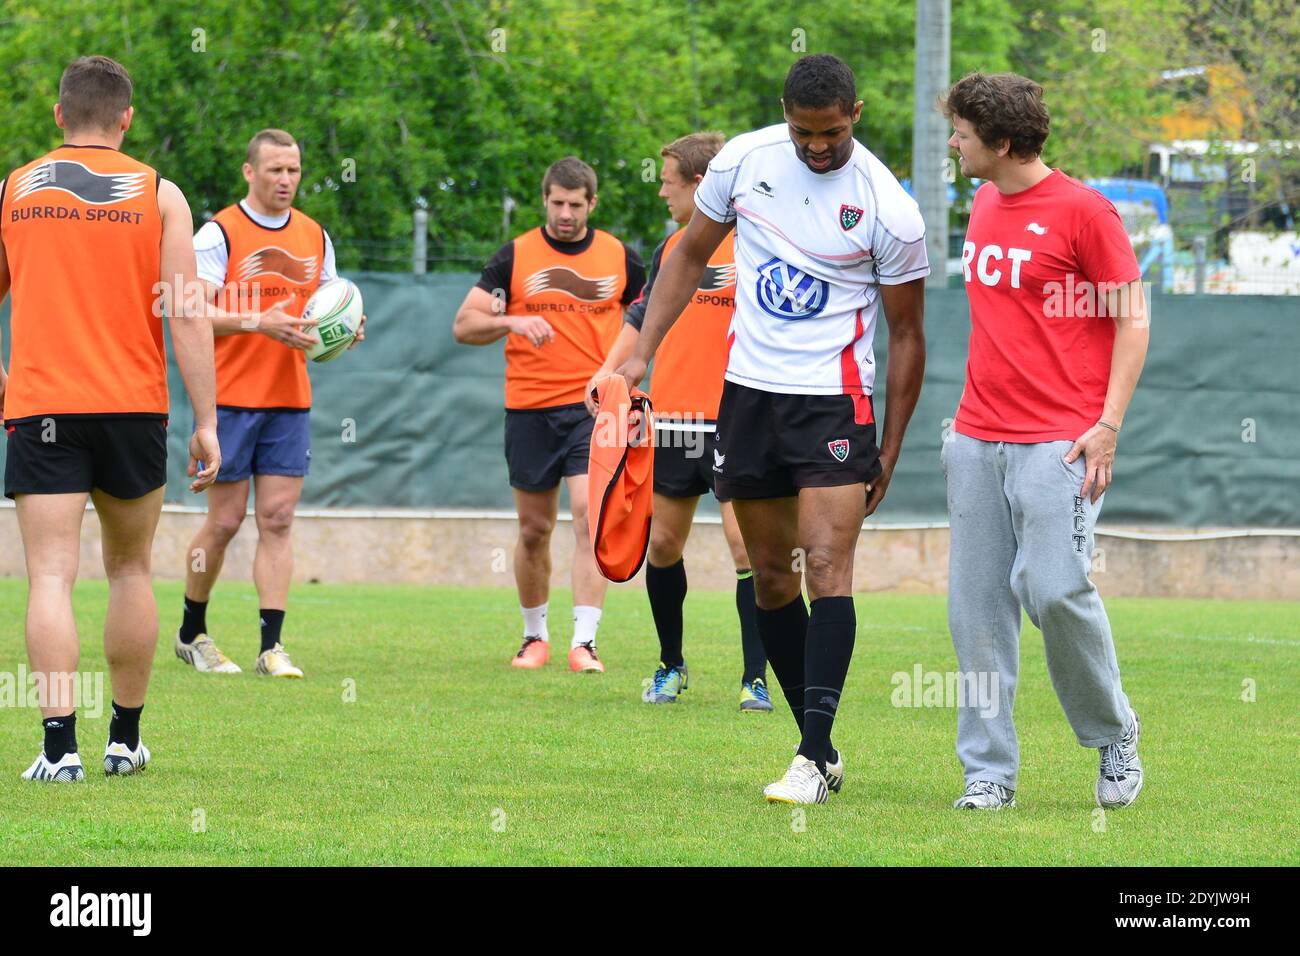 RCT's Delon Armitage is injured during a rugby training session at Berg Stadium in Toulon, France on May 7, 2013 before the HCup Final against ASM Clermont on May 18 in Dublin. Photo by Felix Golesi/ABACAPRESS.COM Stock Photo